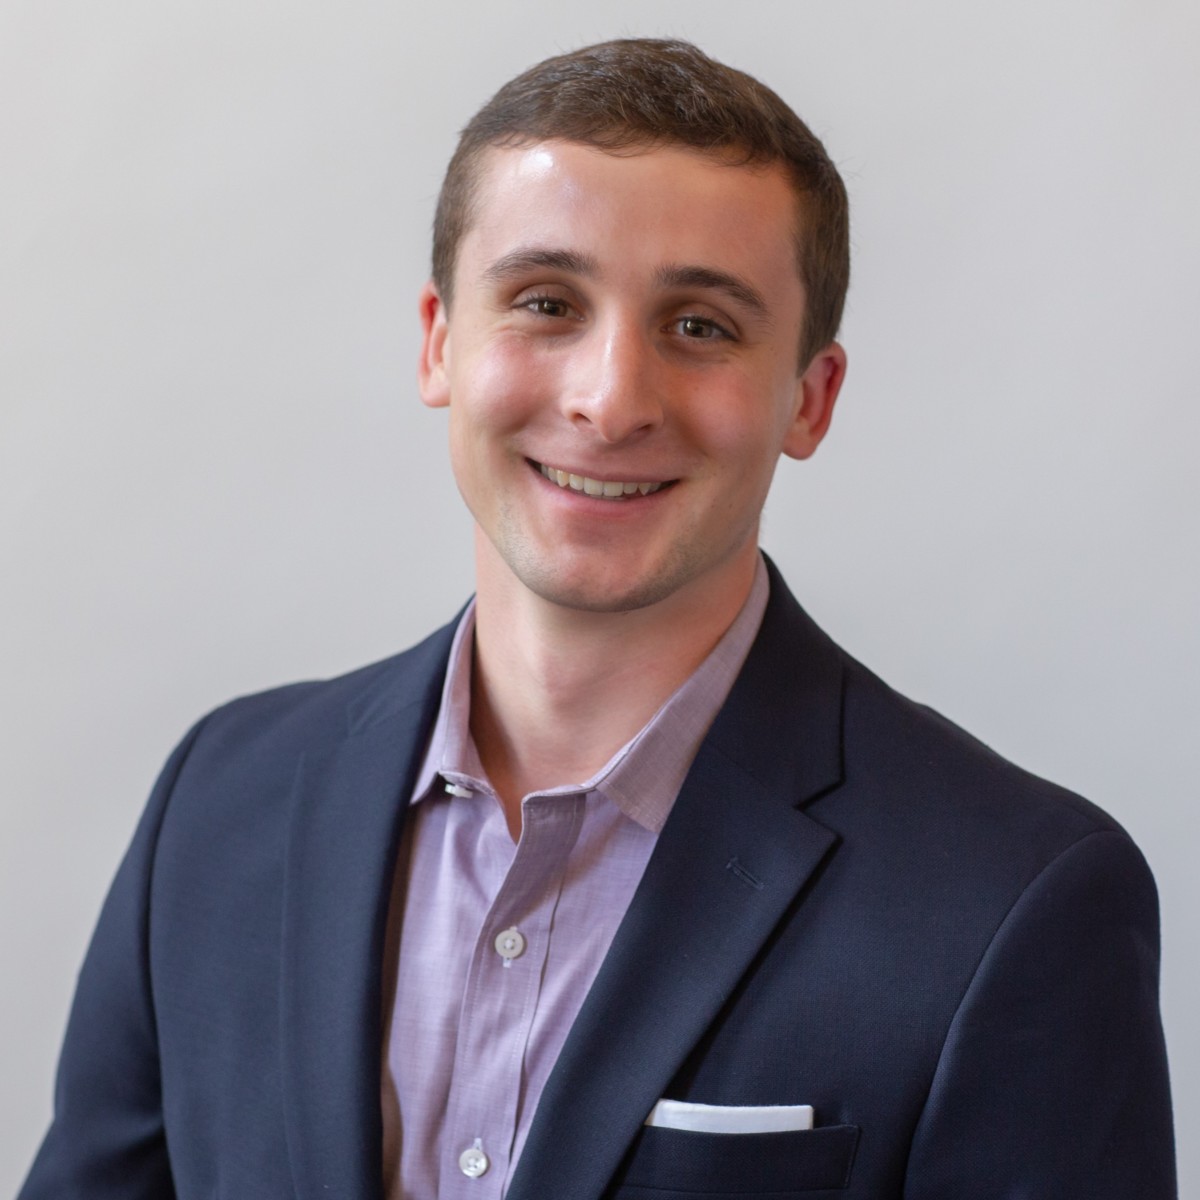 Jake Scearbo, Senior Account Executive at Corporate Ink, a Boston PR agency for B2B Tech companies.